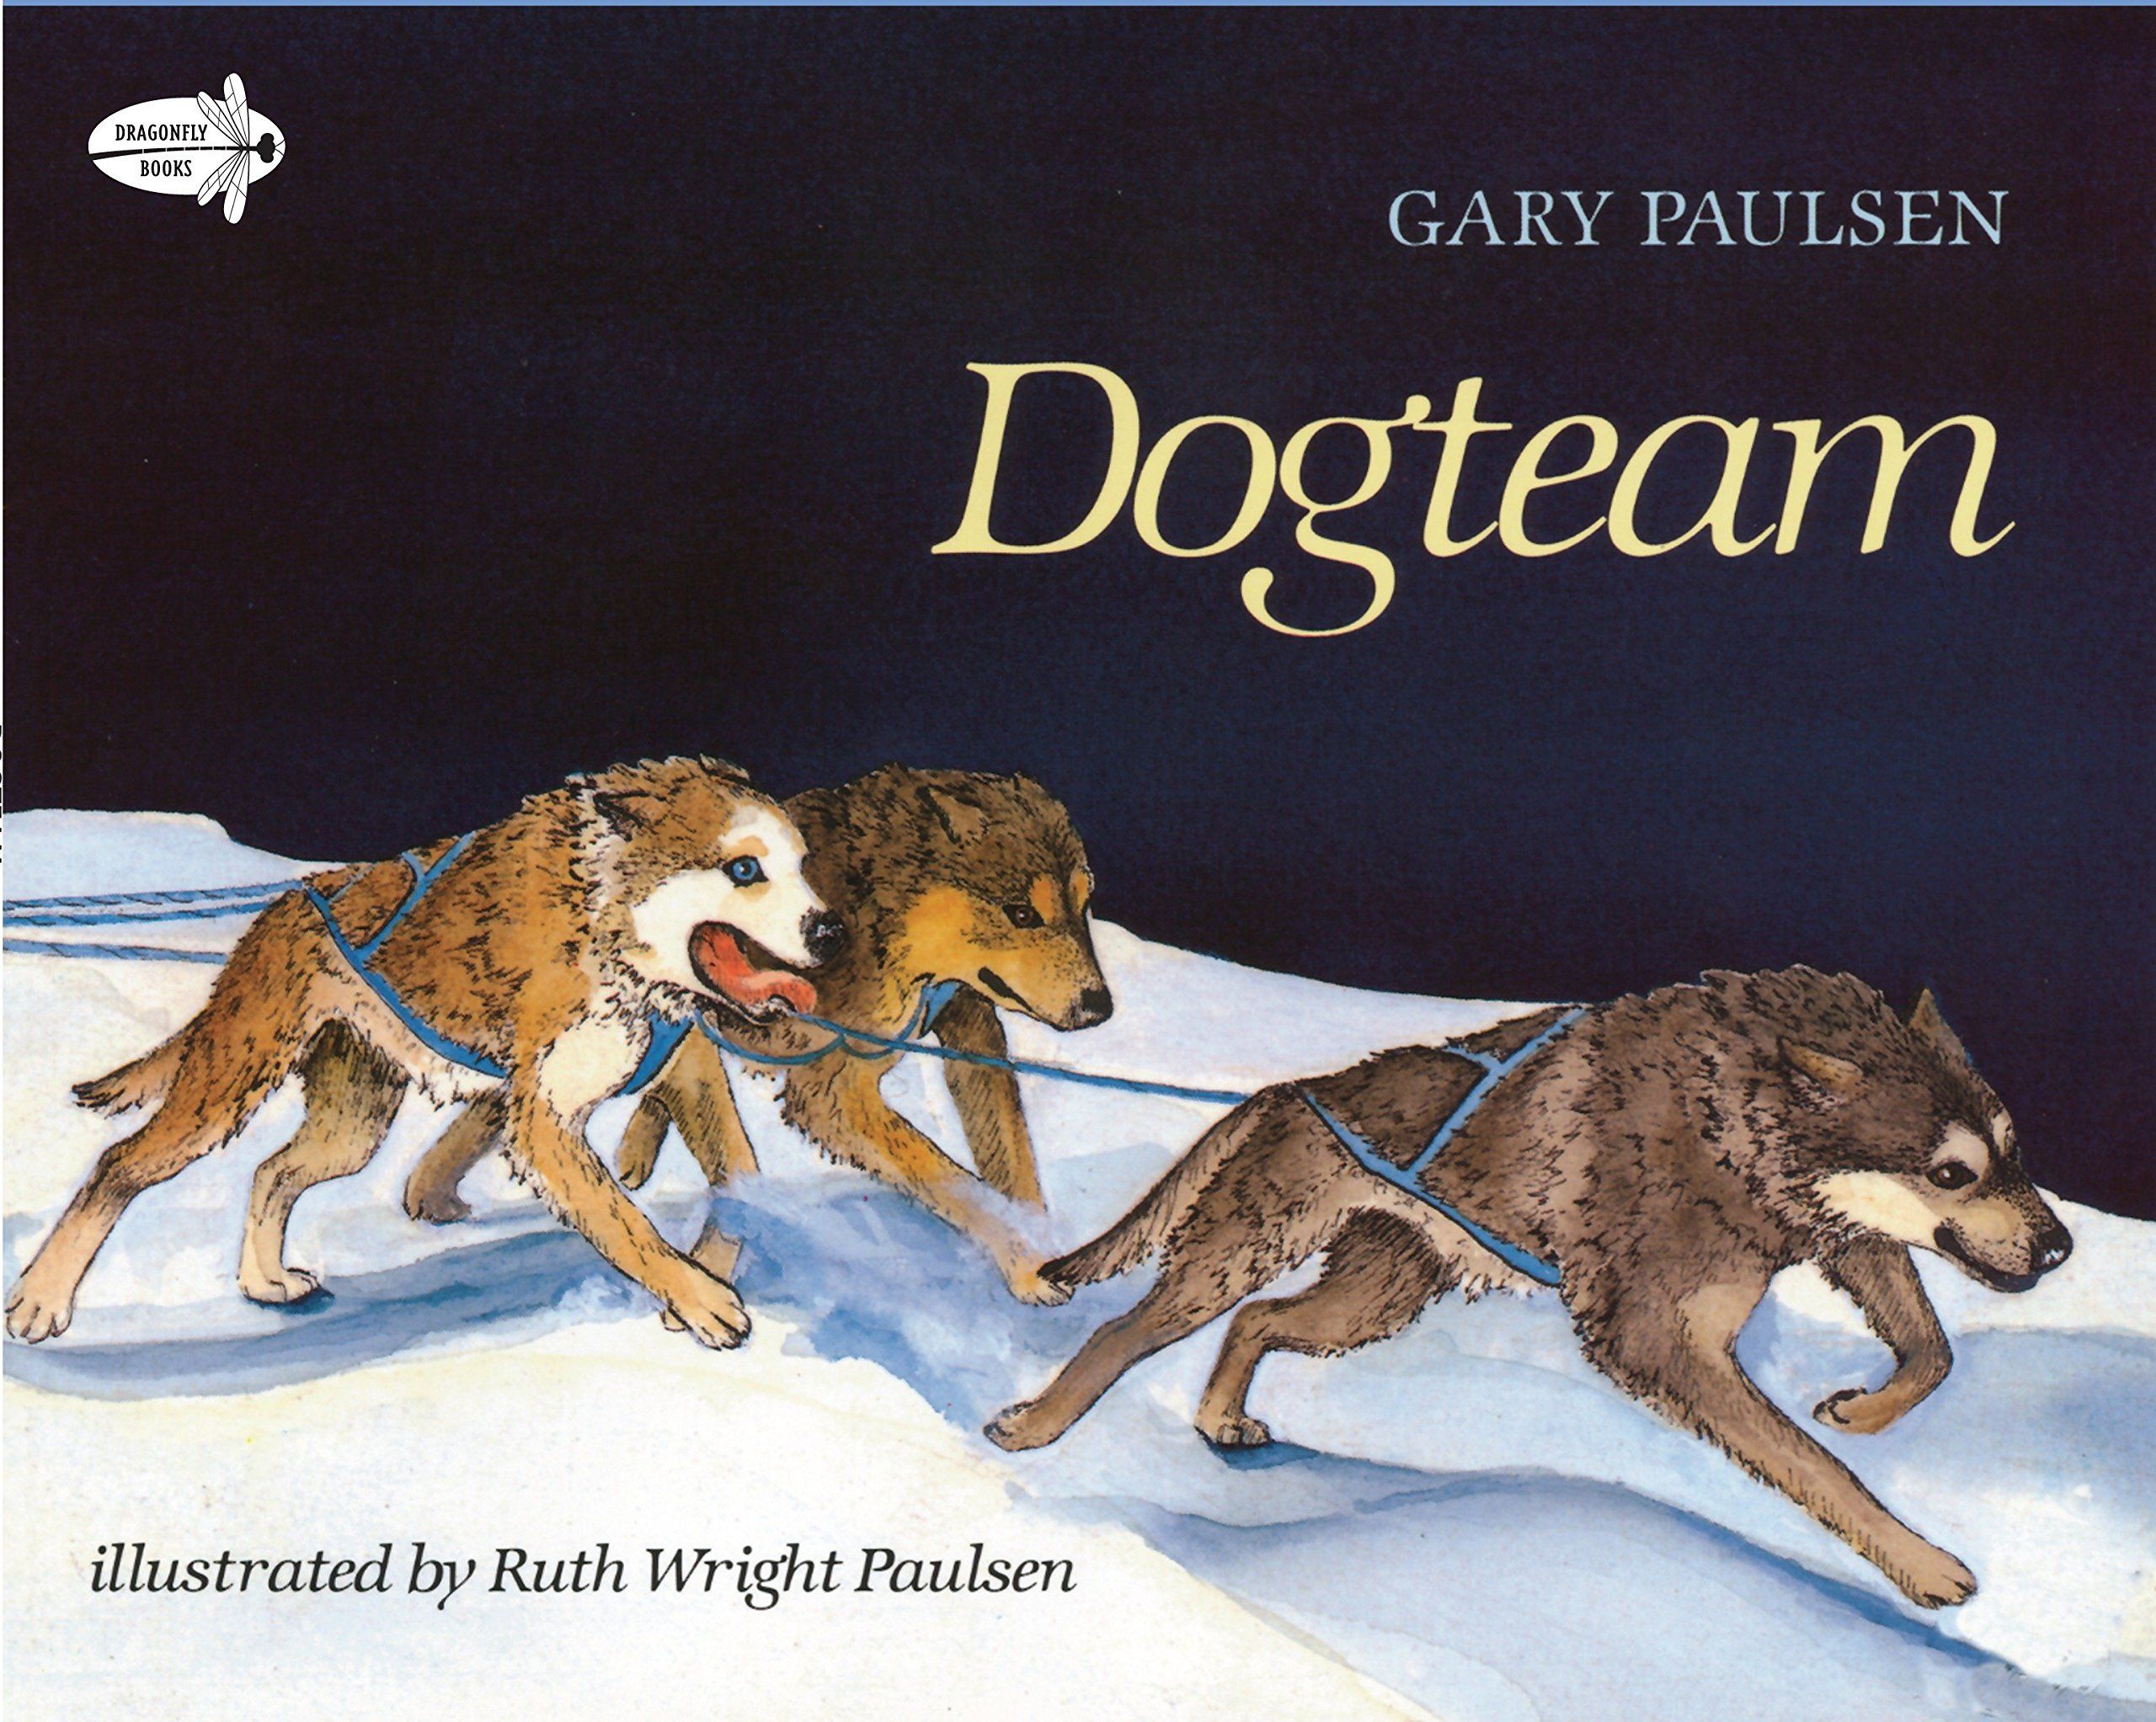 Book cover of Dogteam by Gary Paulsen